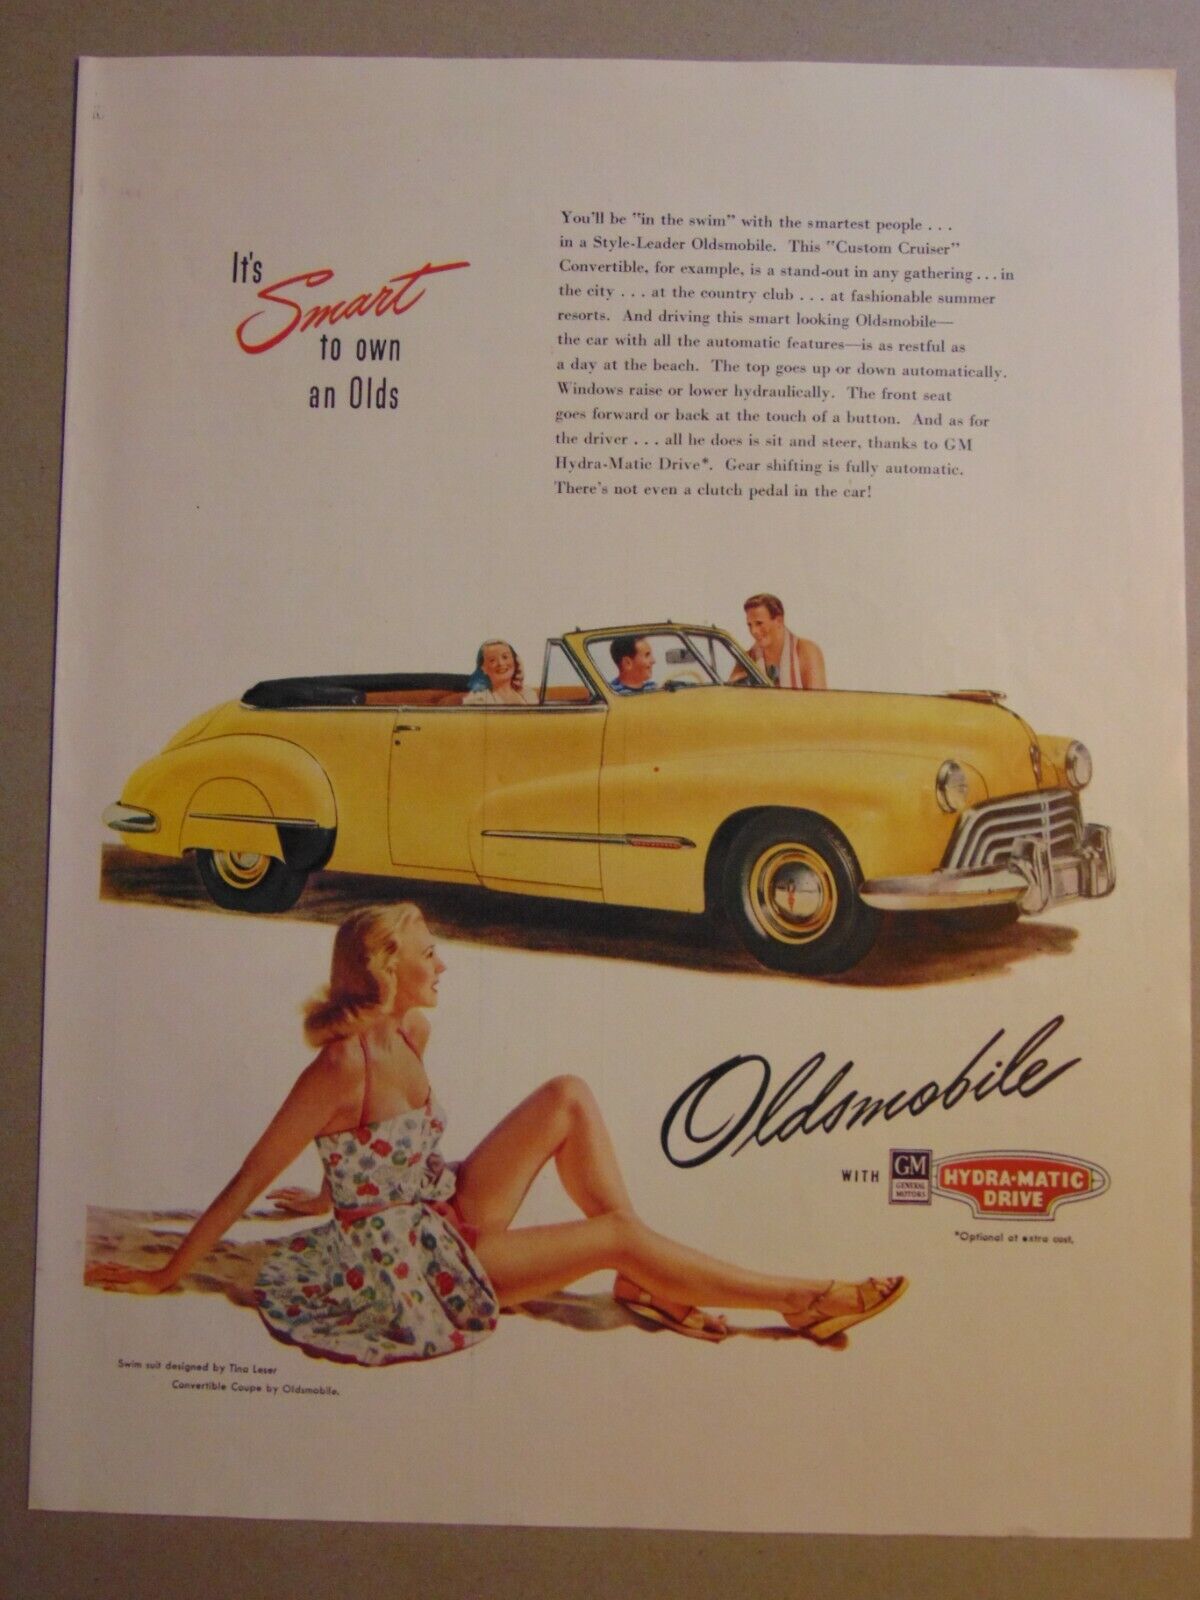 1947 Smart Own a Yellow OLDSMOBILE CONVERTIBLE COUPE vintage art print ad